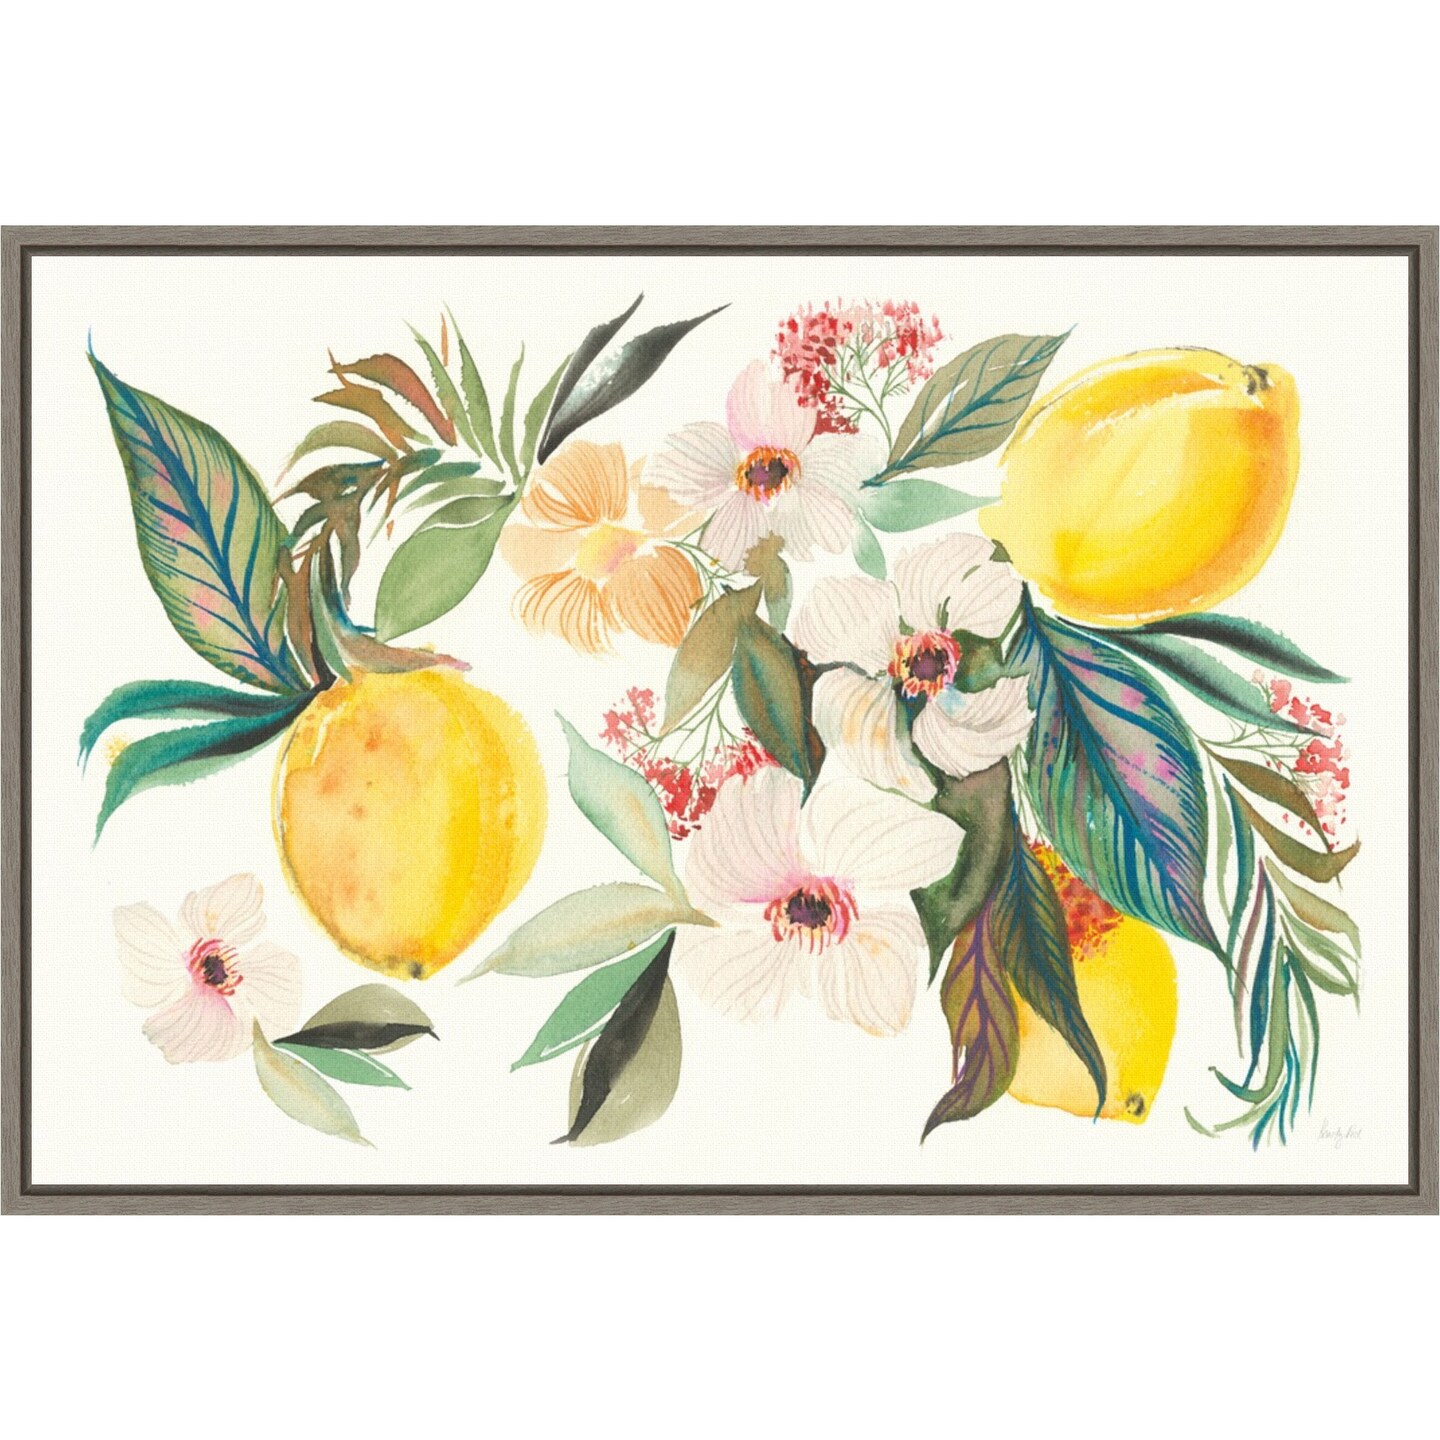 Citrus Summer I v2 by Kristy Rice 23-in. W x 16-in. H. Canvas Wall Art Print Framed in Grey